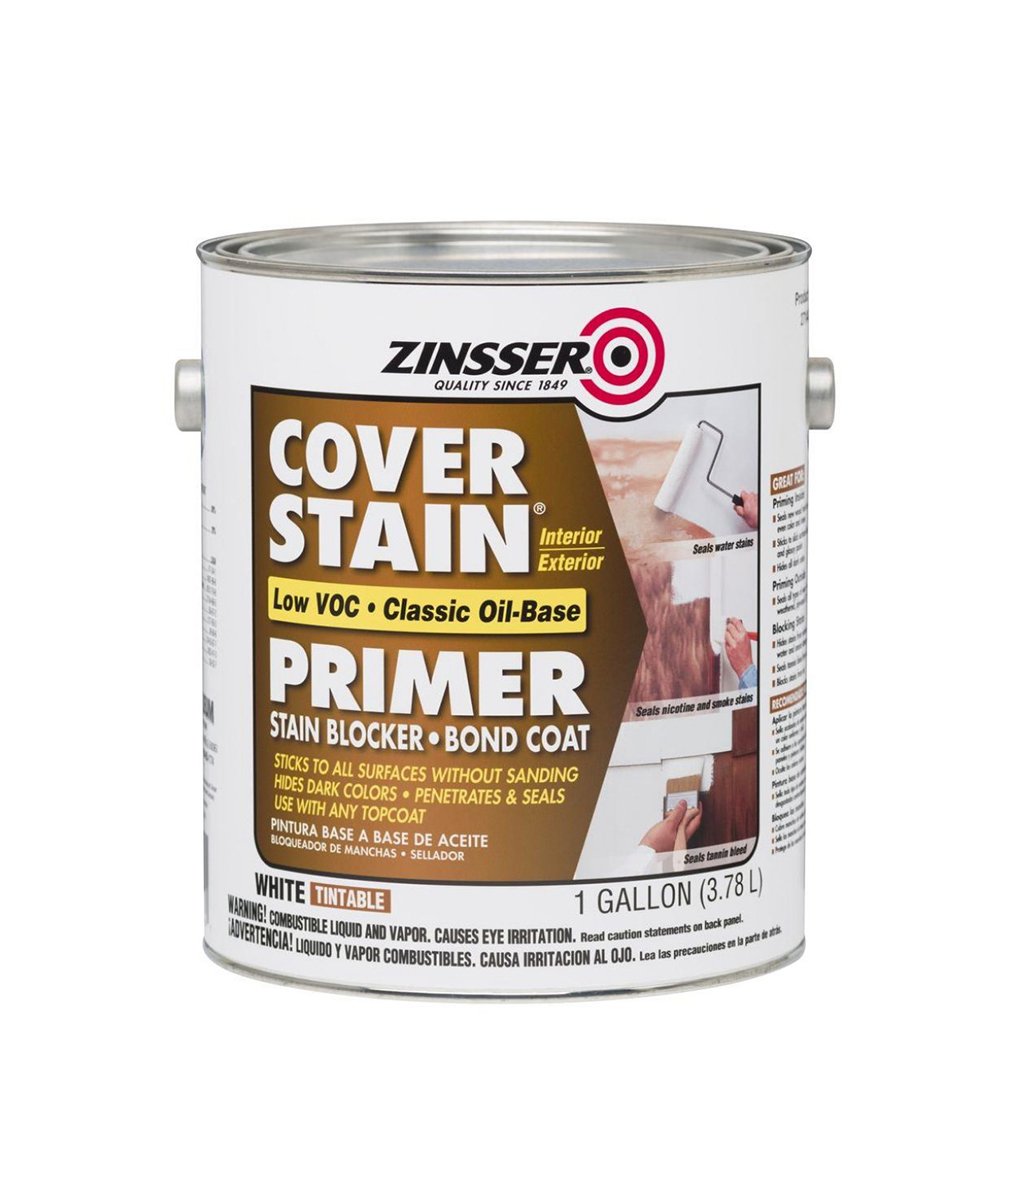 Coverstain